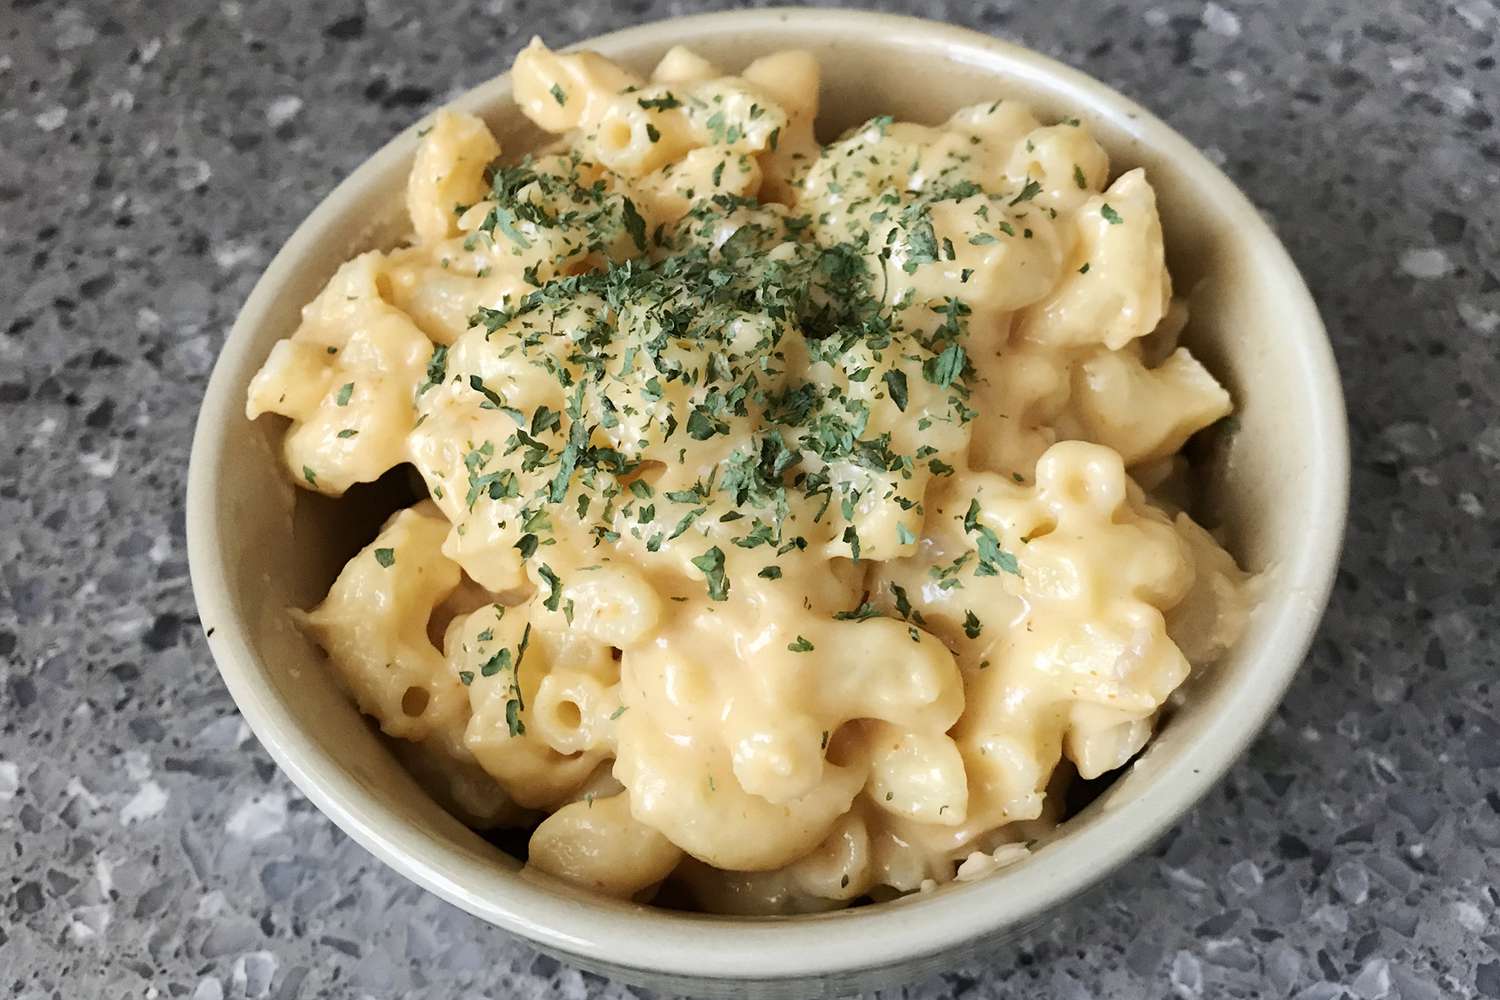 a close up view on a bowl of simple creamy macaroni and cheese topped with fresh parsley.